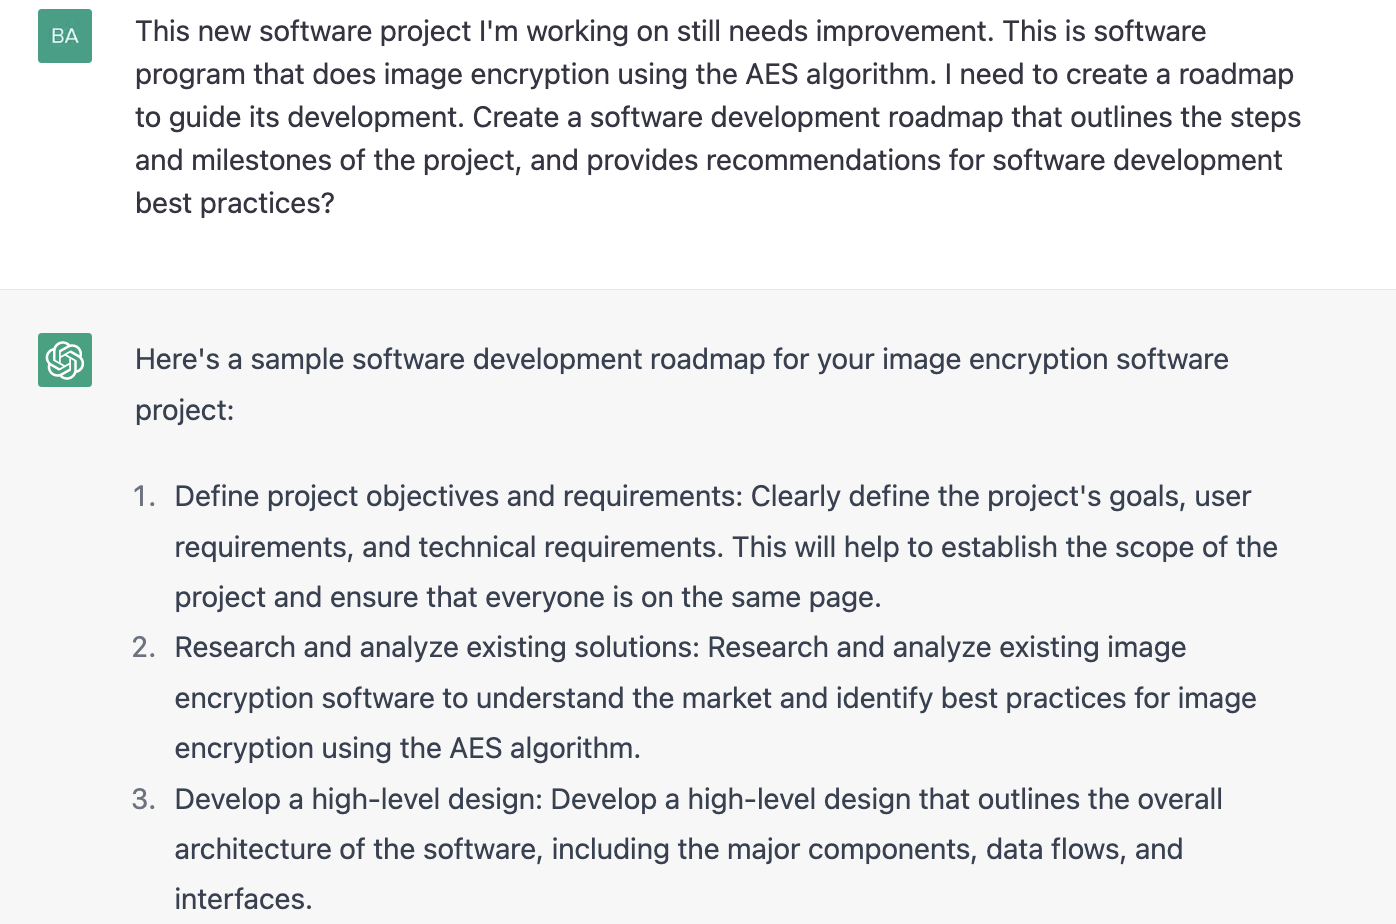 ChatGPT prompt about the sample software development roadmap